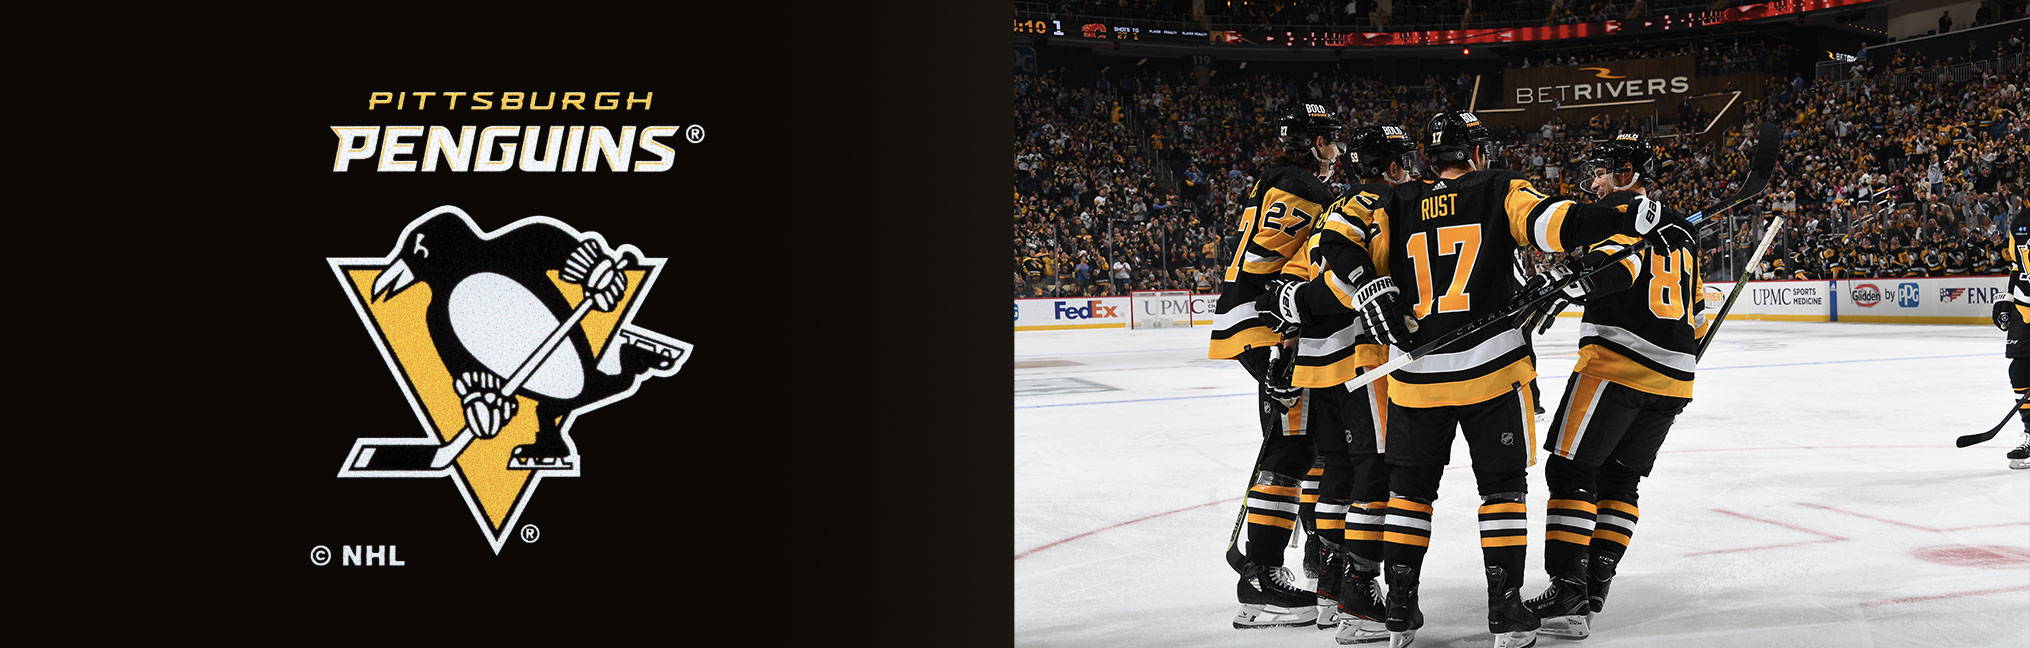 Pittsburght Penguins® - logo and image of players after a scored goal.